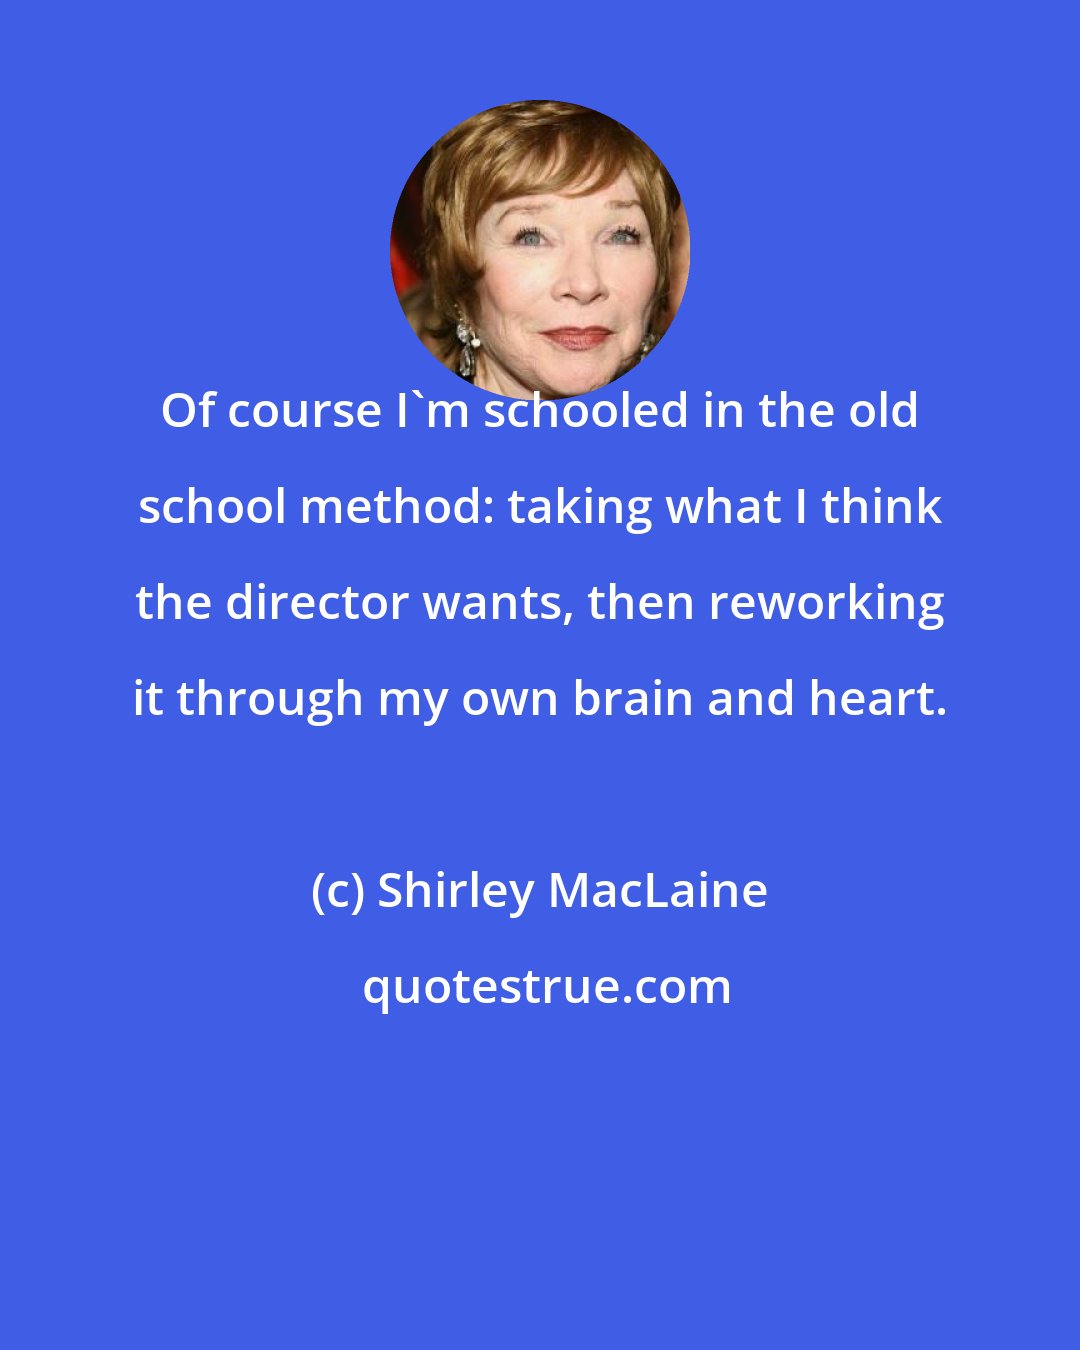 Shirley MacLaine: Of course I'm schooled in the old school method: taking what I think the director wants, then reworking it through my own brain and heart.